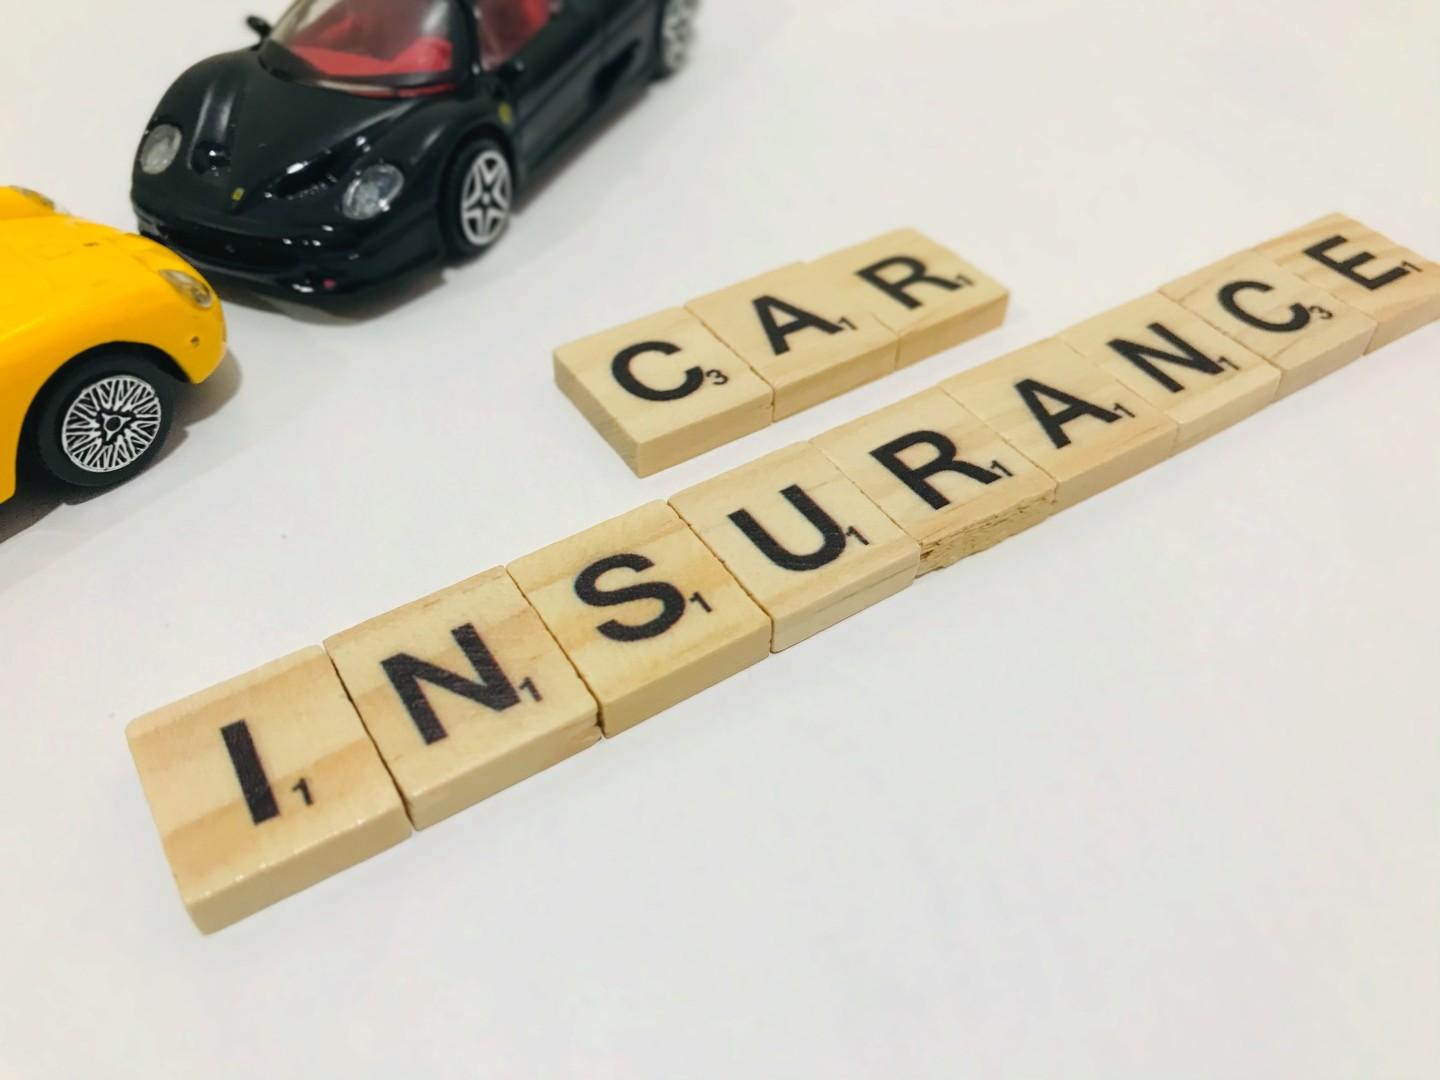 Not every car insurance company has to follow old conventions | Twenty20